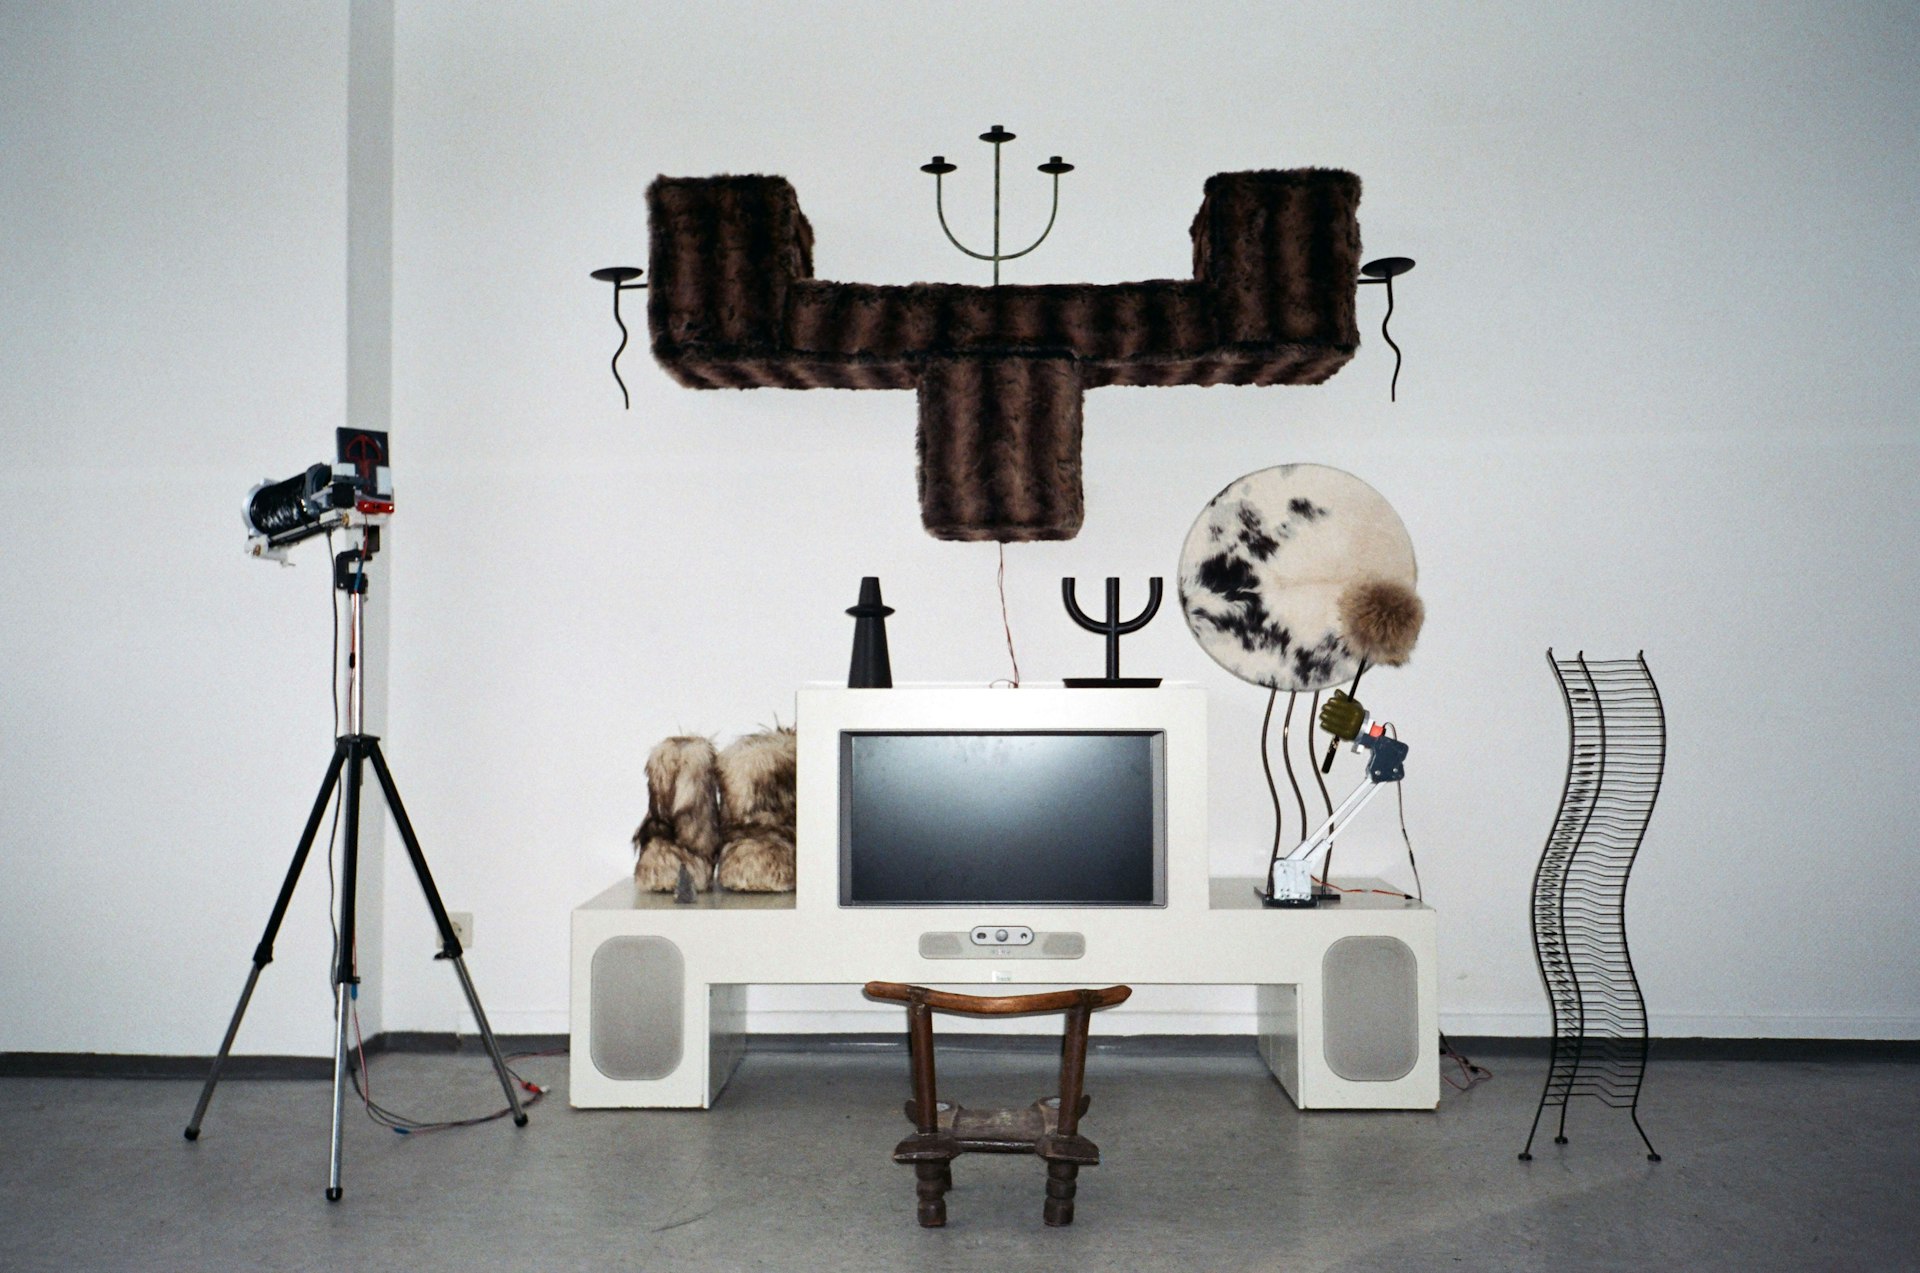 An installation view of Museum of Trance by Henrike Naumann and Bastian Hagedorn